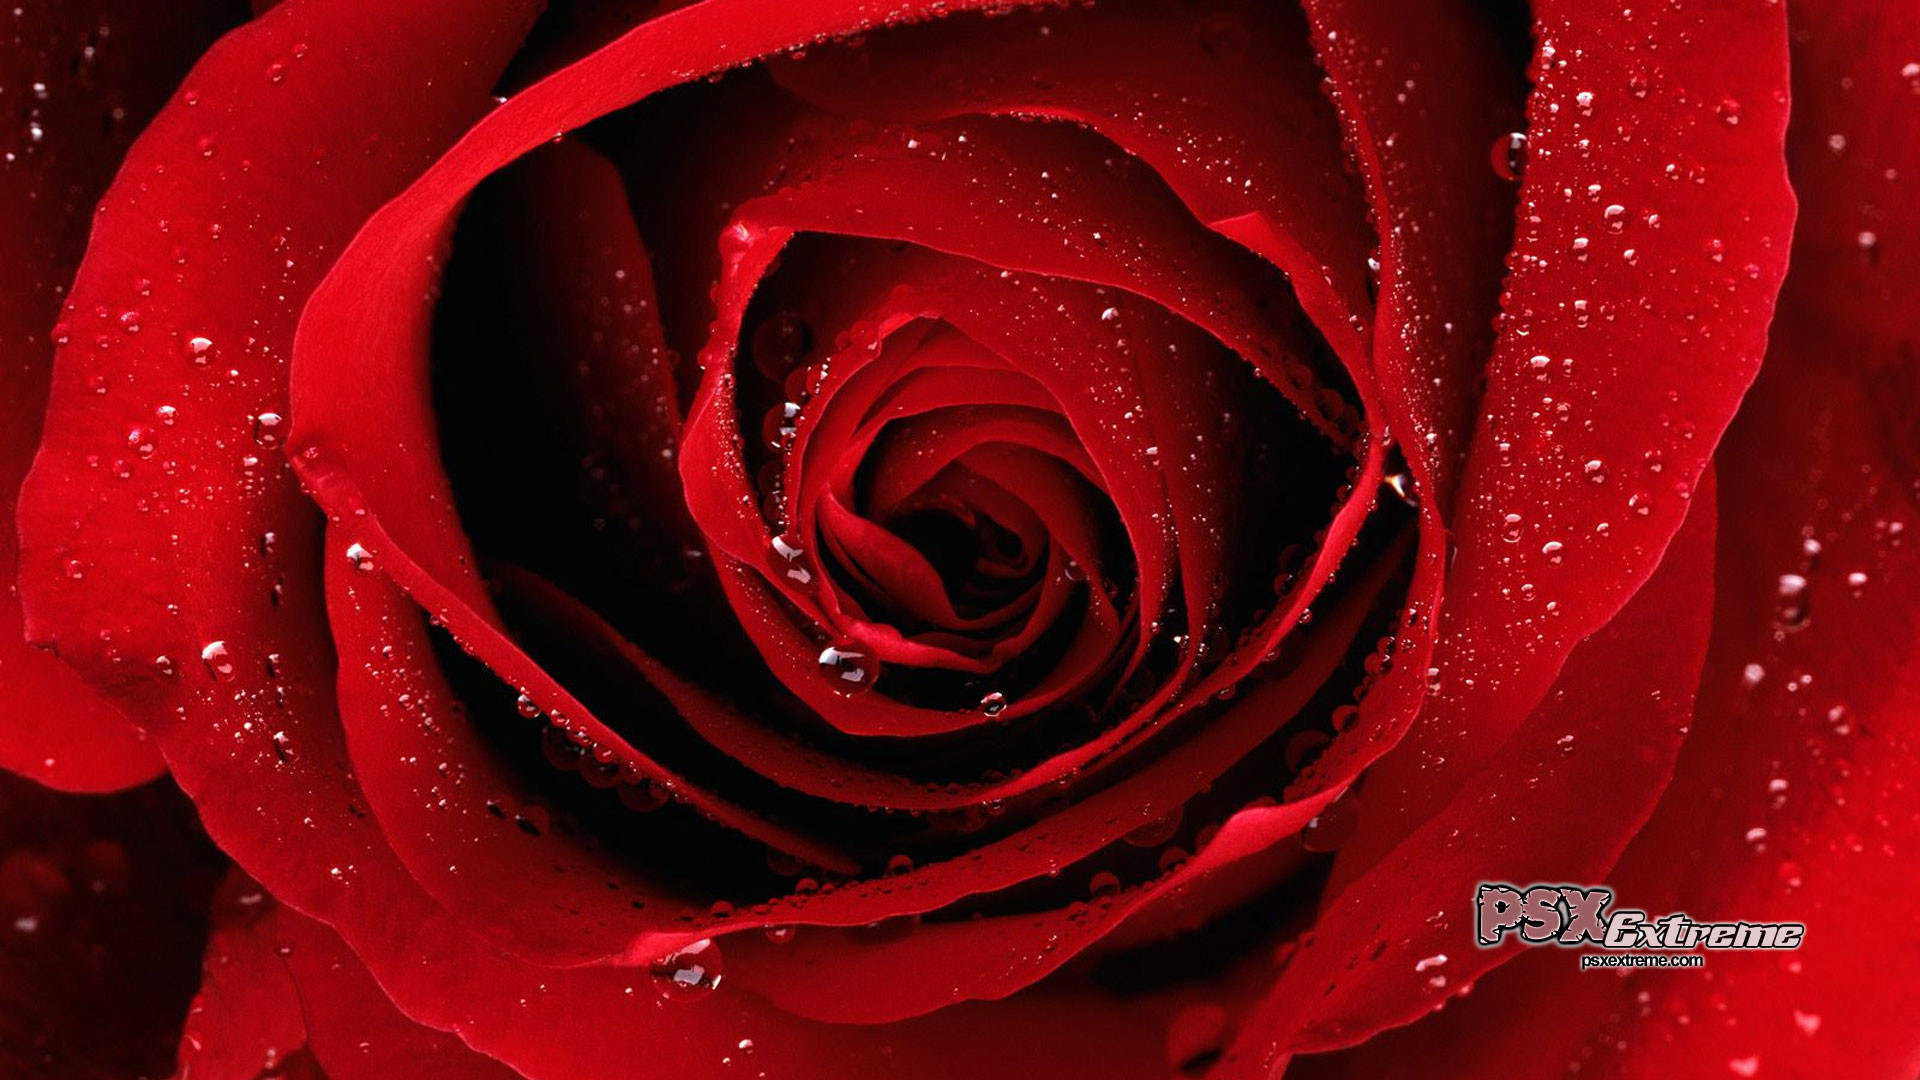 1920x1080 Red Rose Picture Wallpapers (40 Wallpapers)